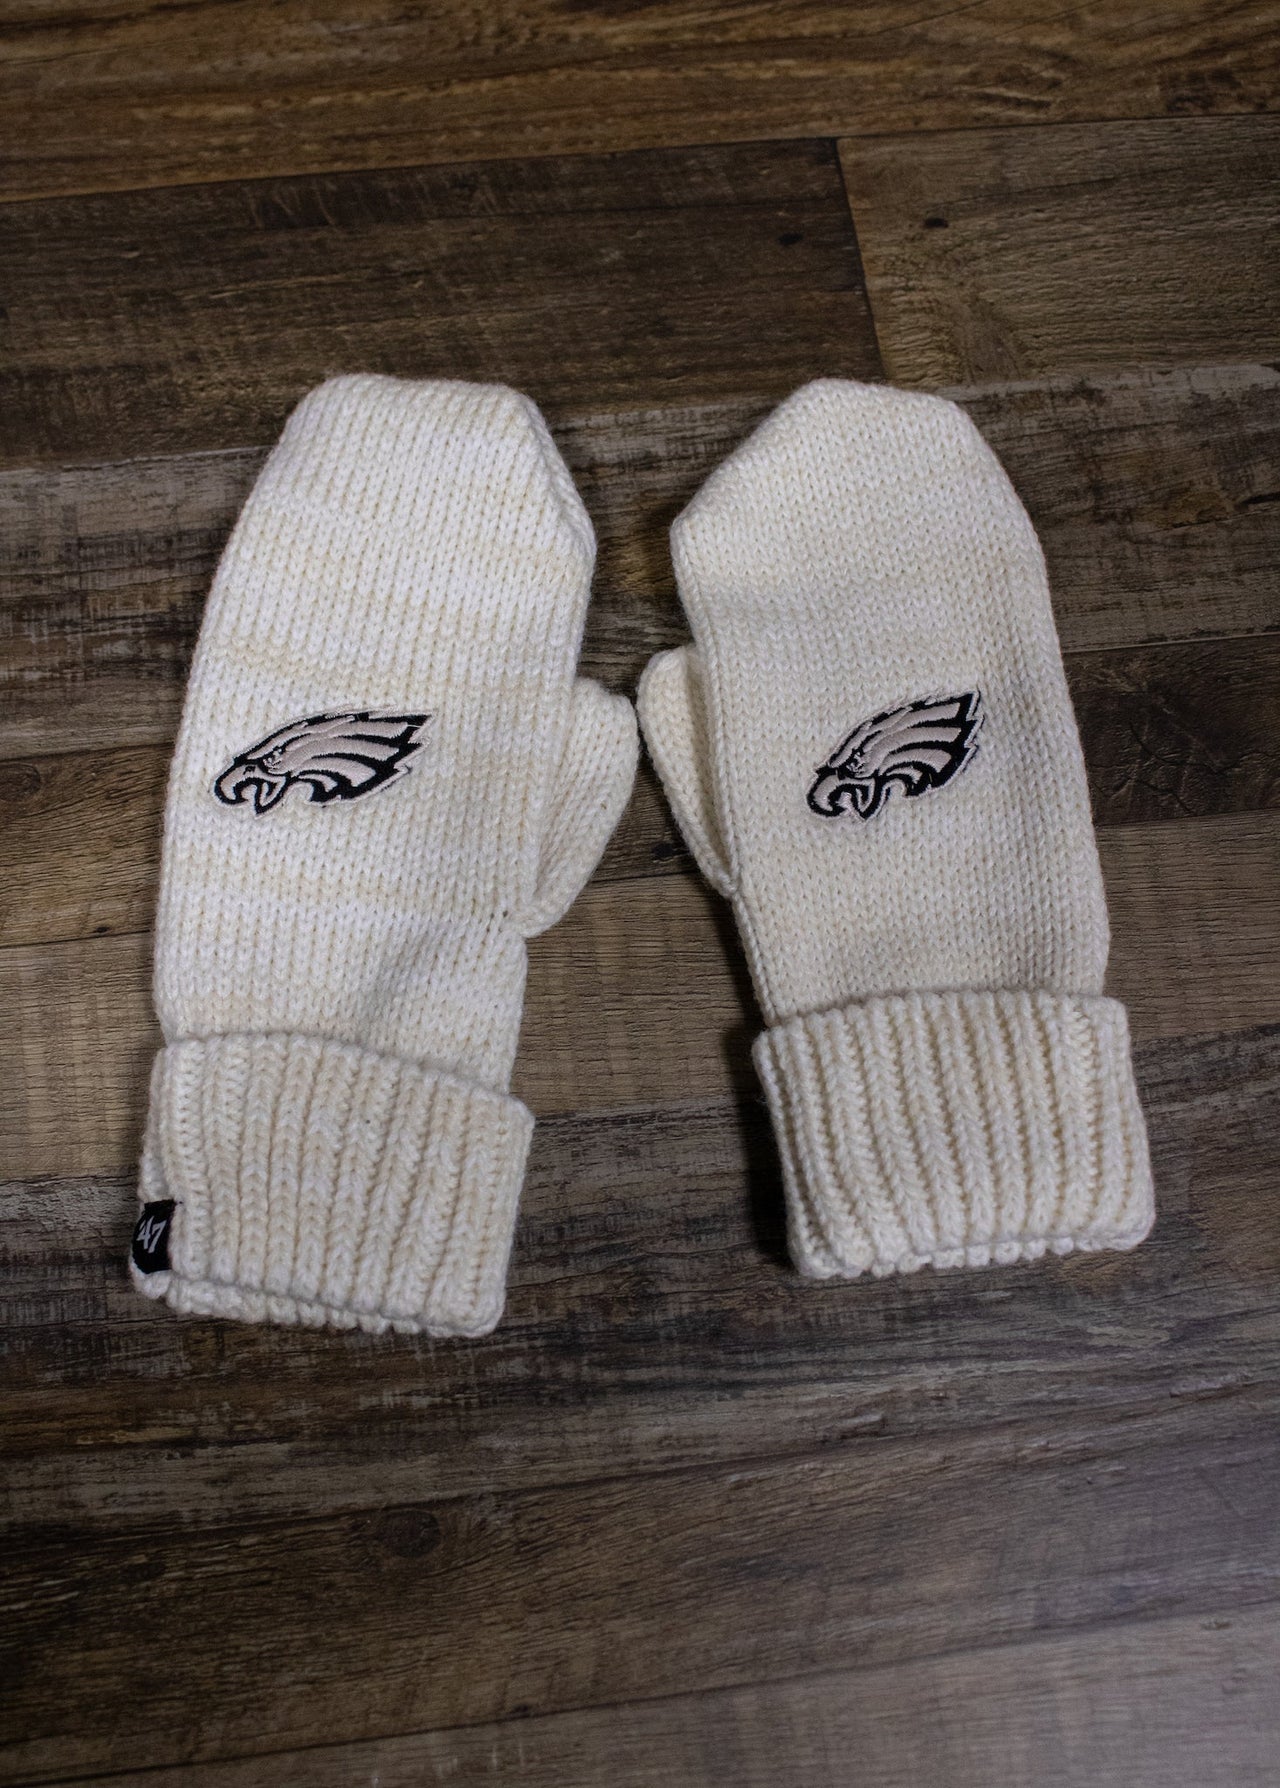 Embroidered on the tops of the Philadelphia Eagles women's mittens are the Philadelphia Eagles logos